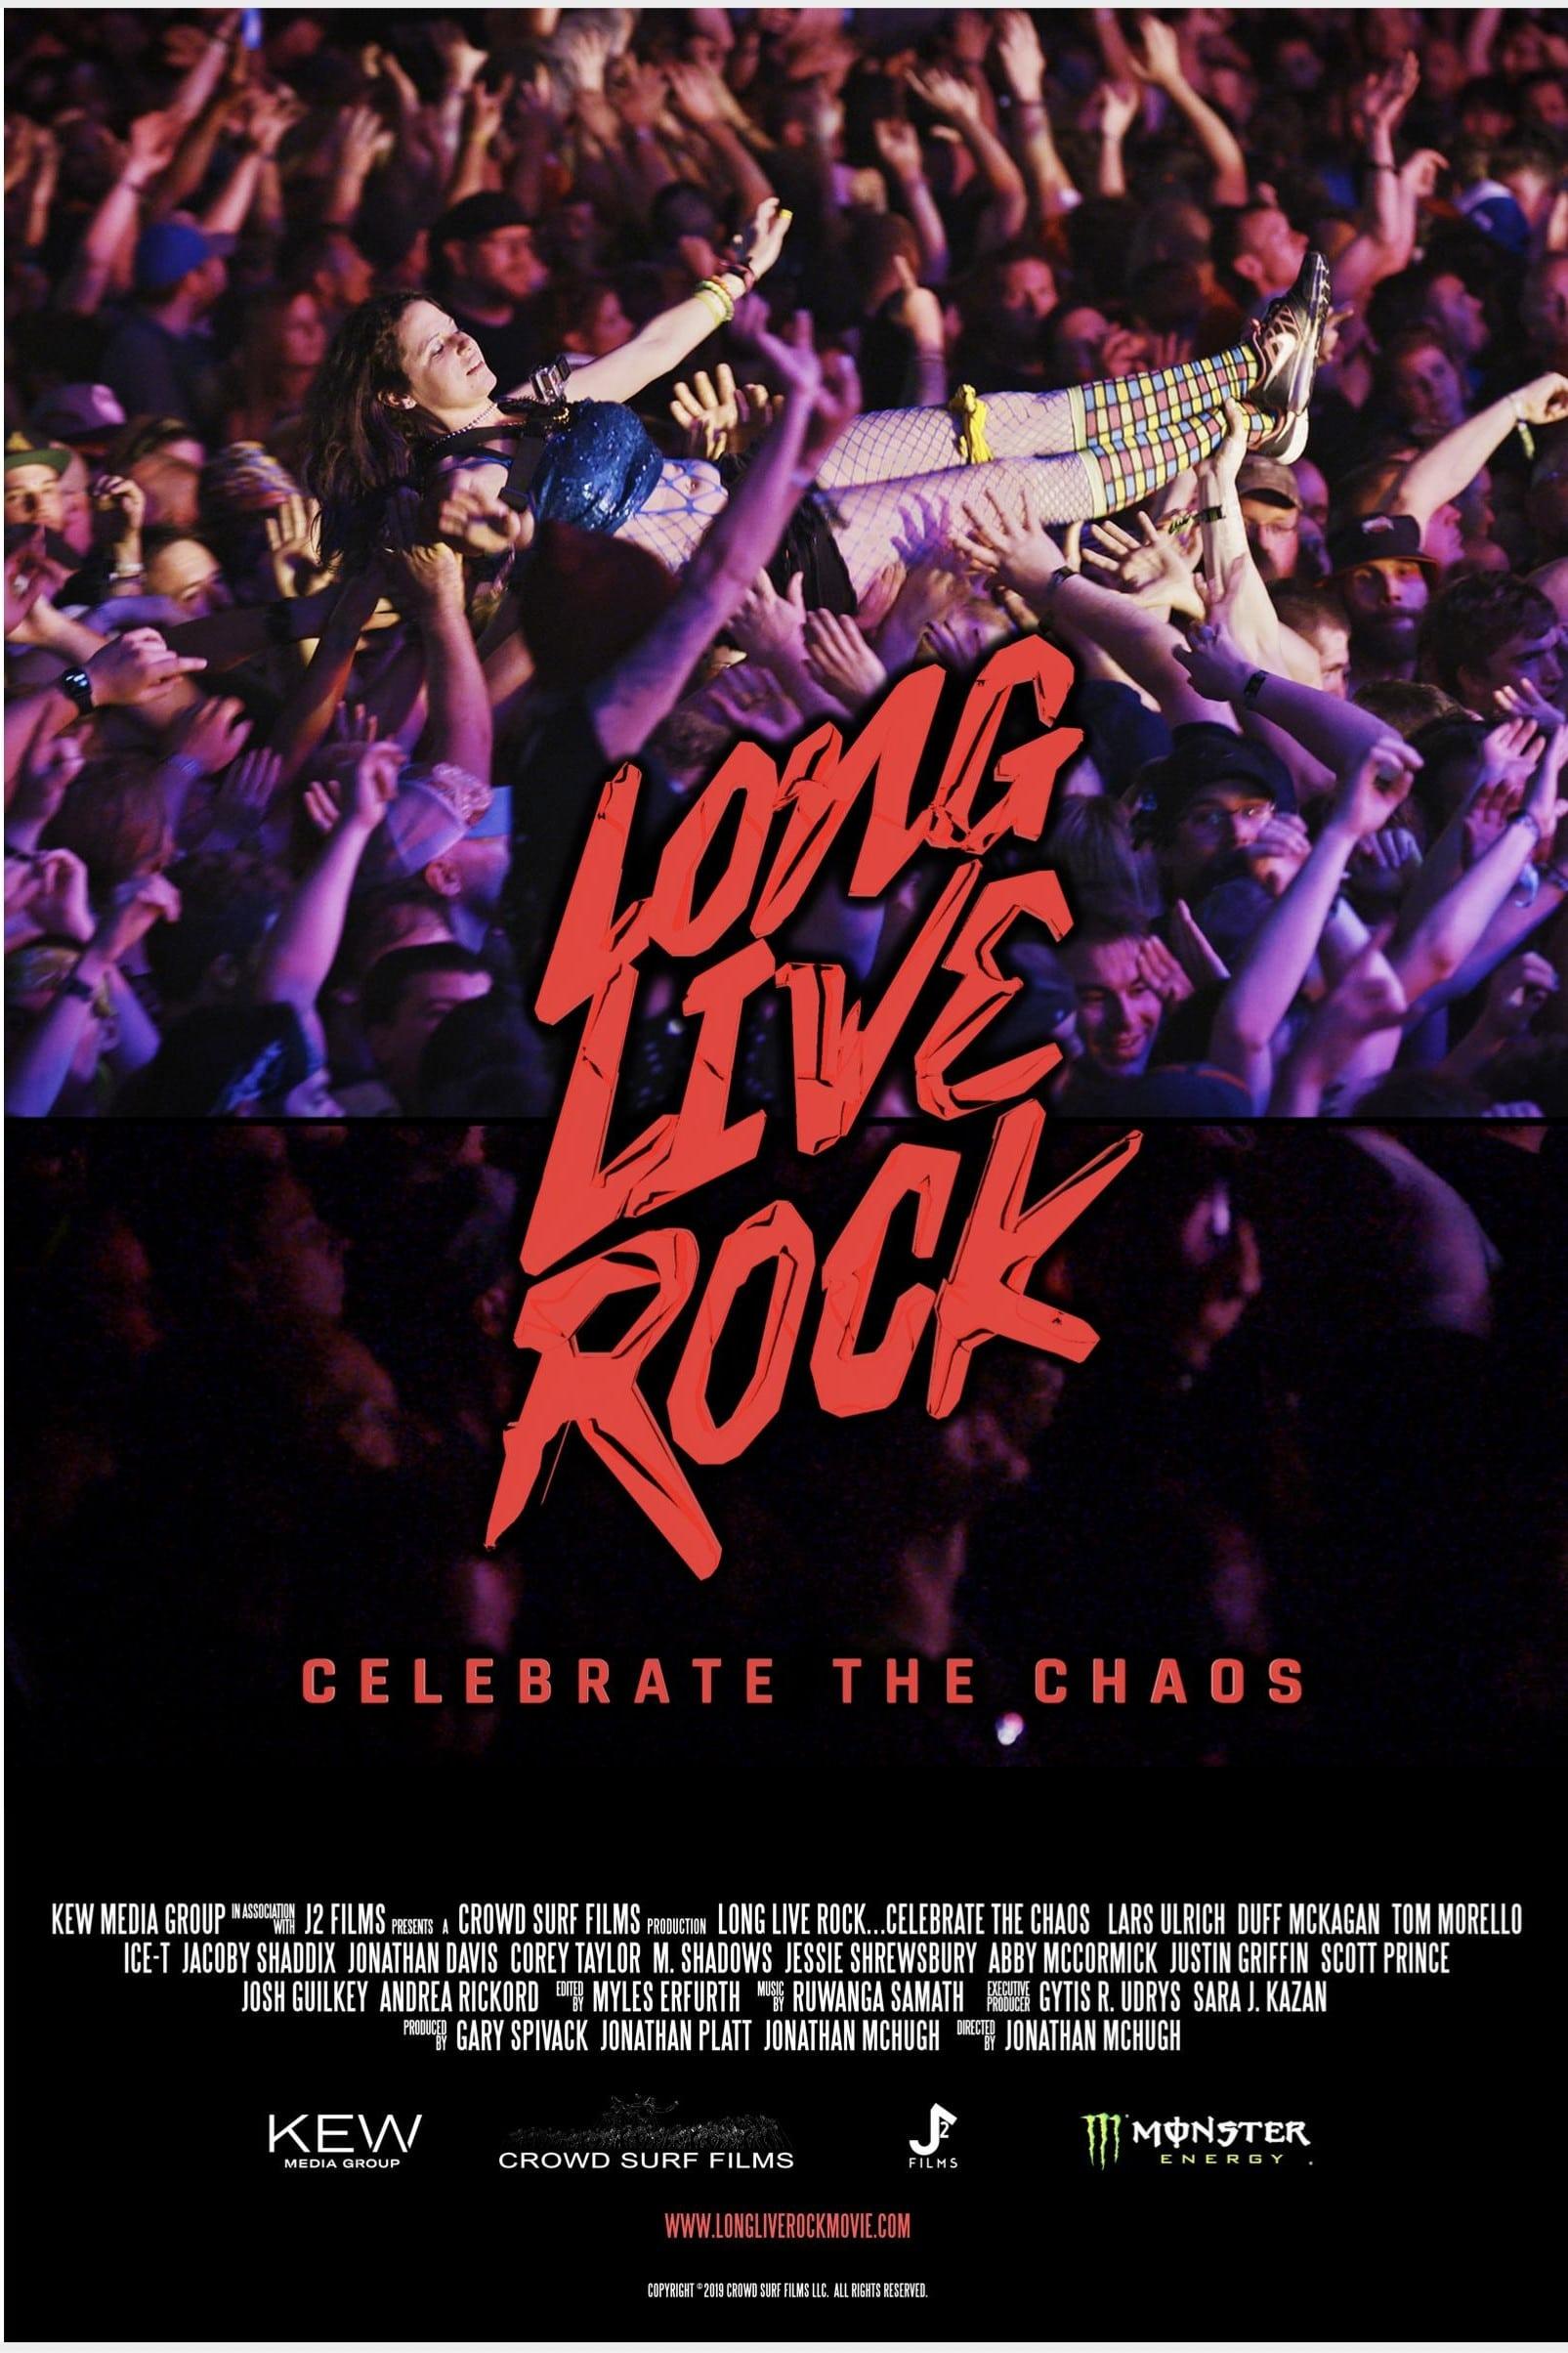 Long Live Rock... Celebrate the Chaos poster